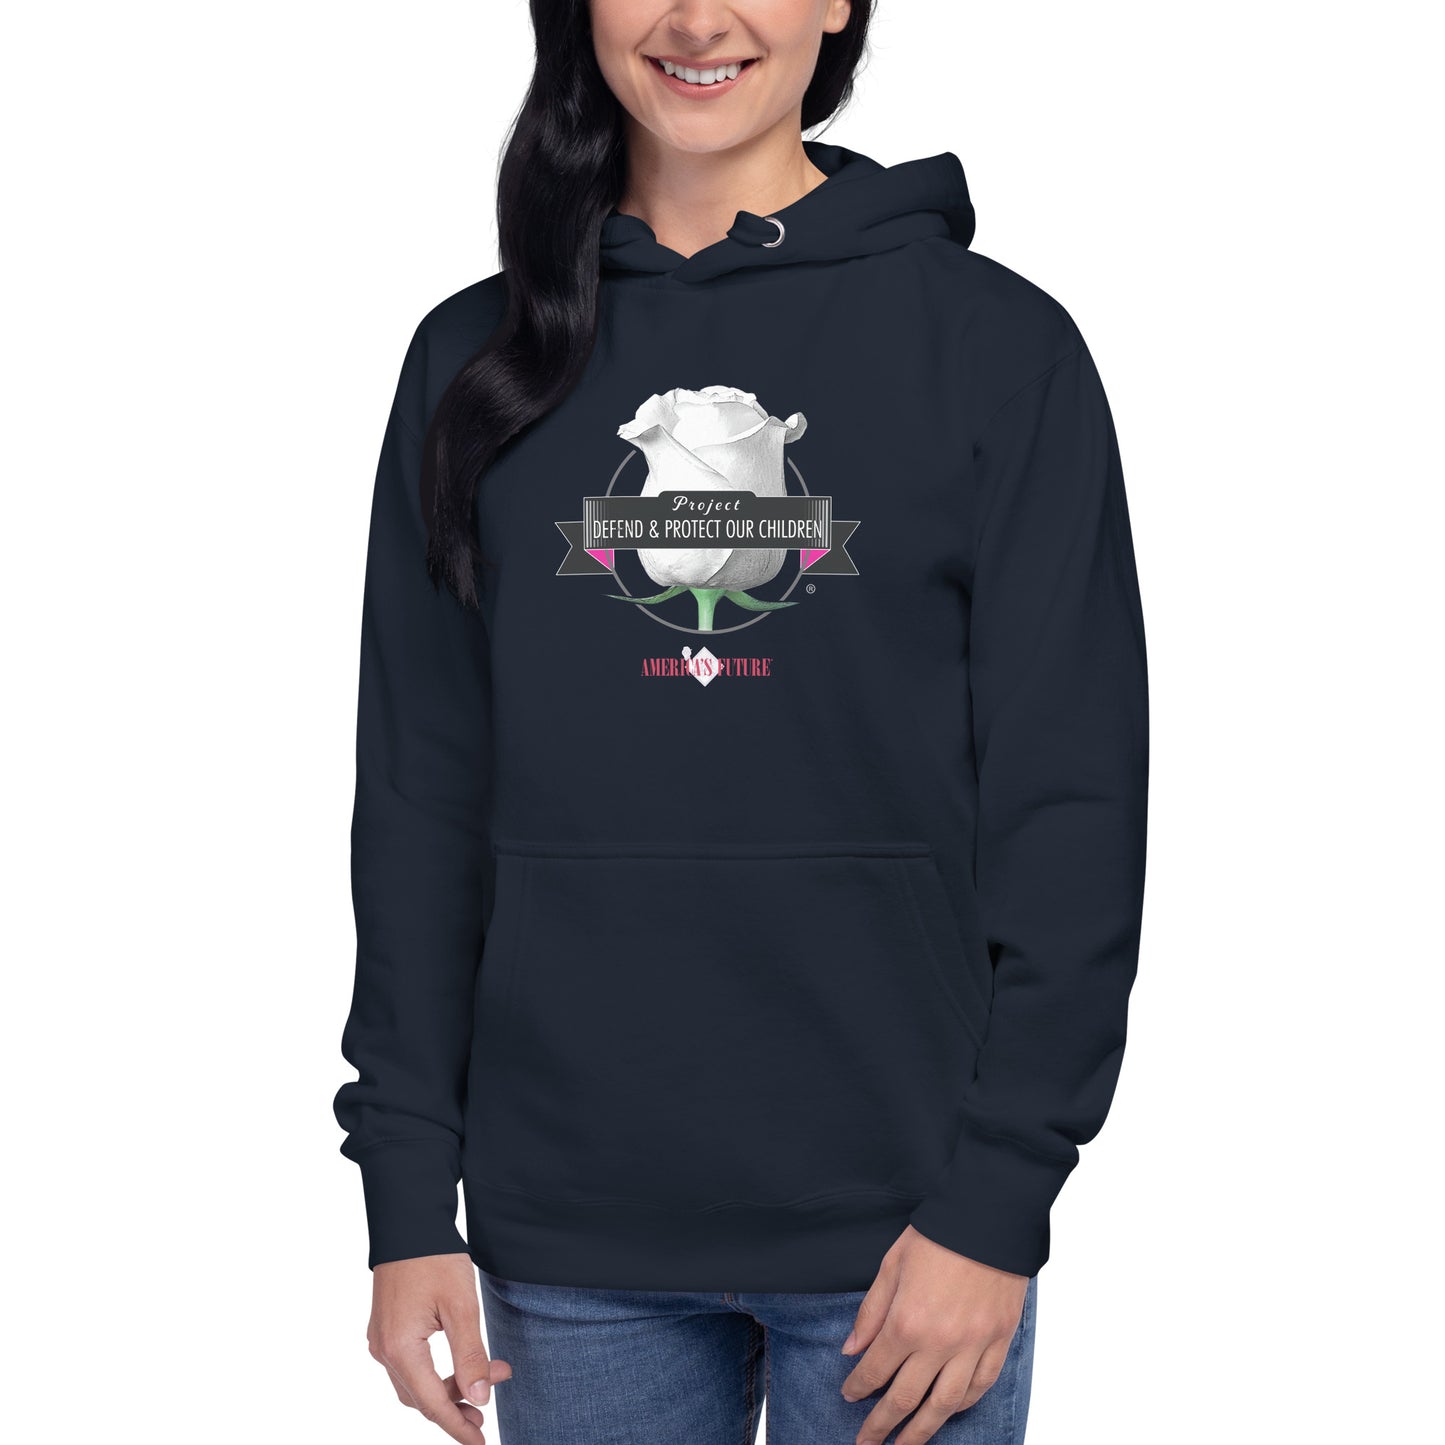 Project Defend & Protect Our Children - Unisex Hoodie